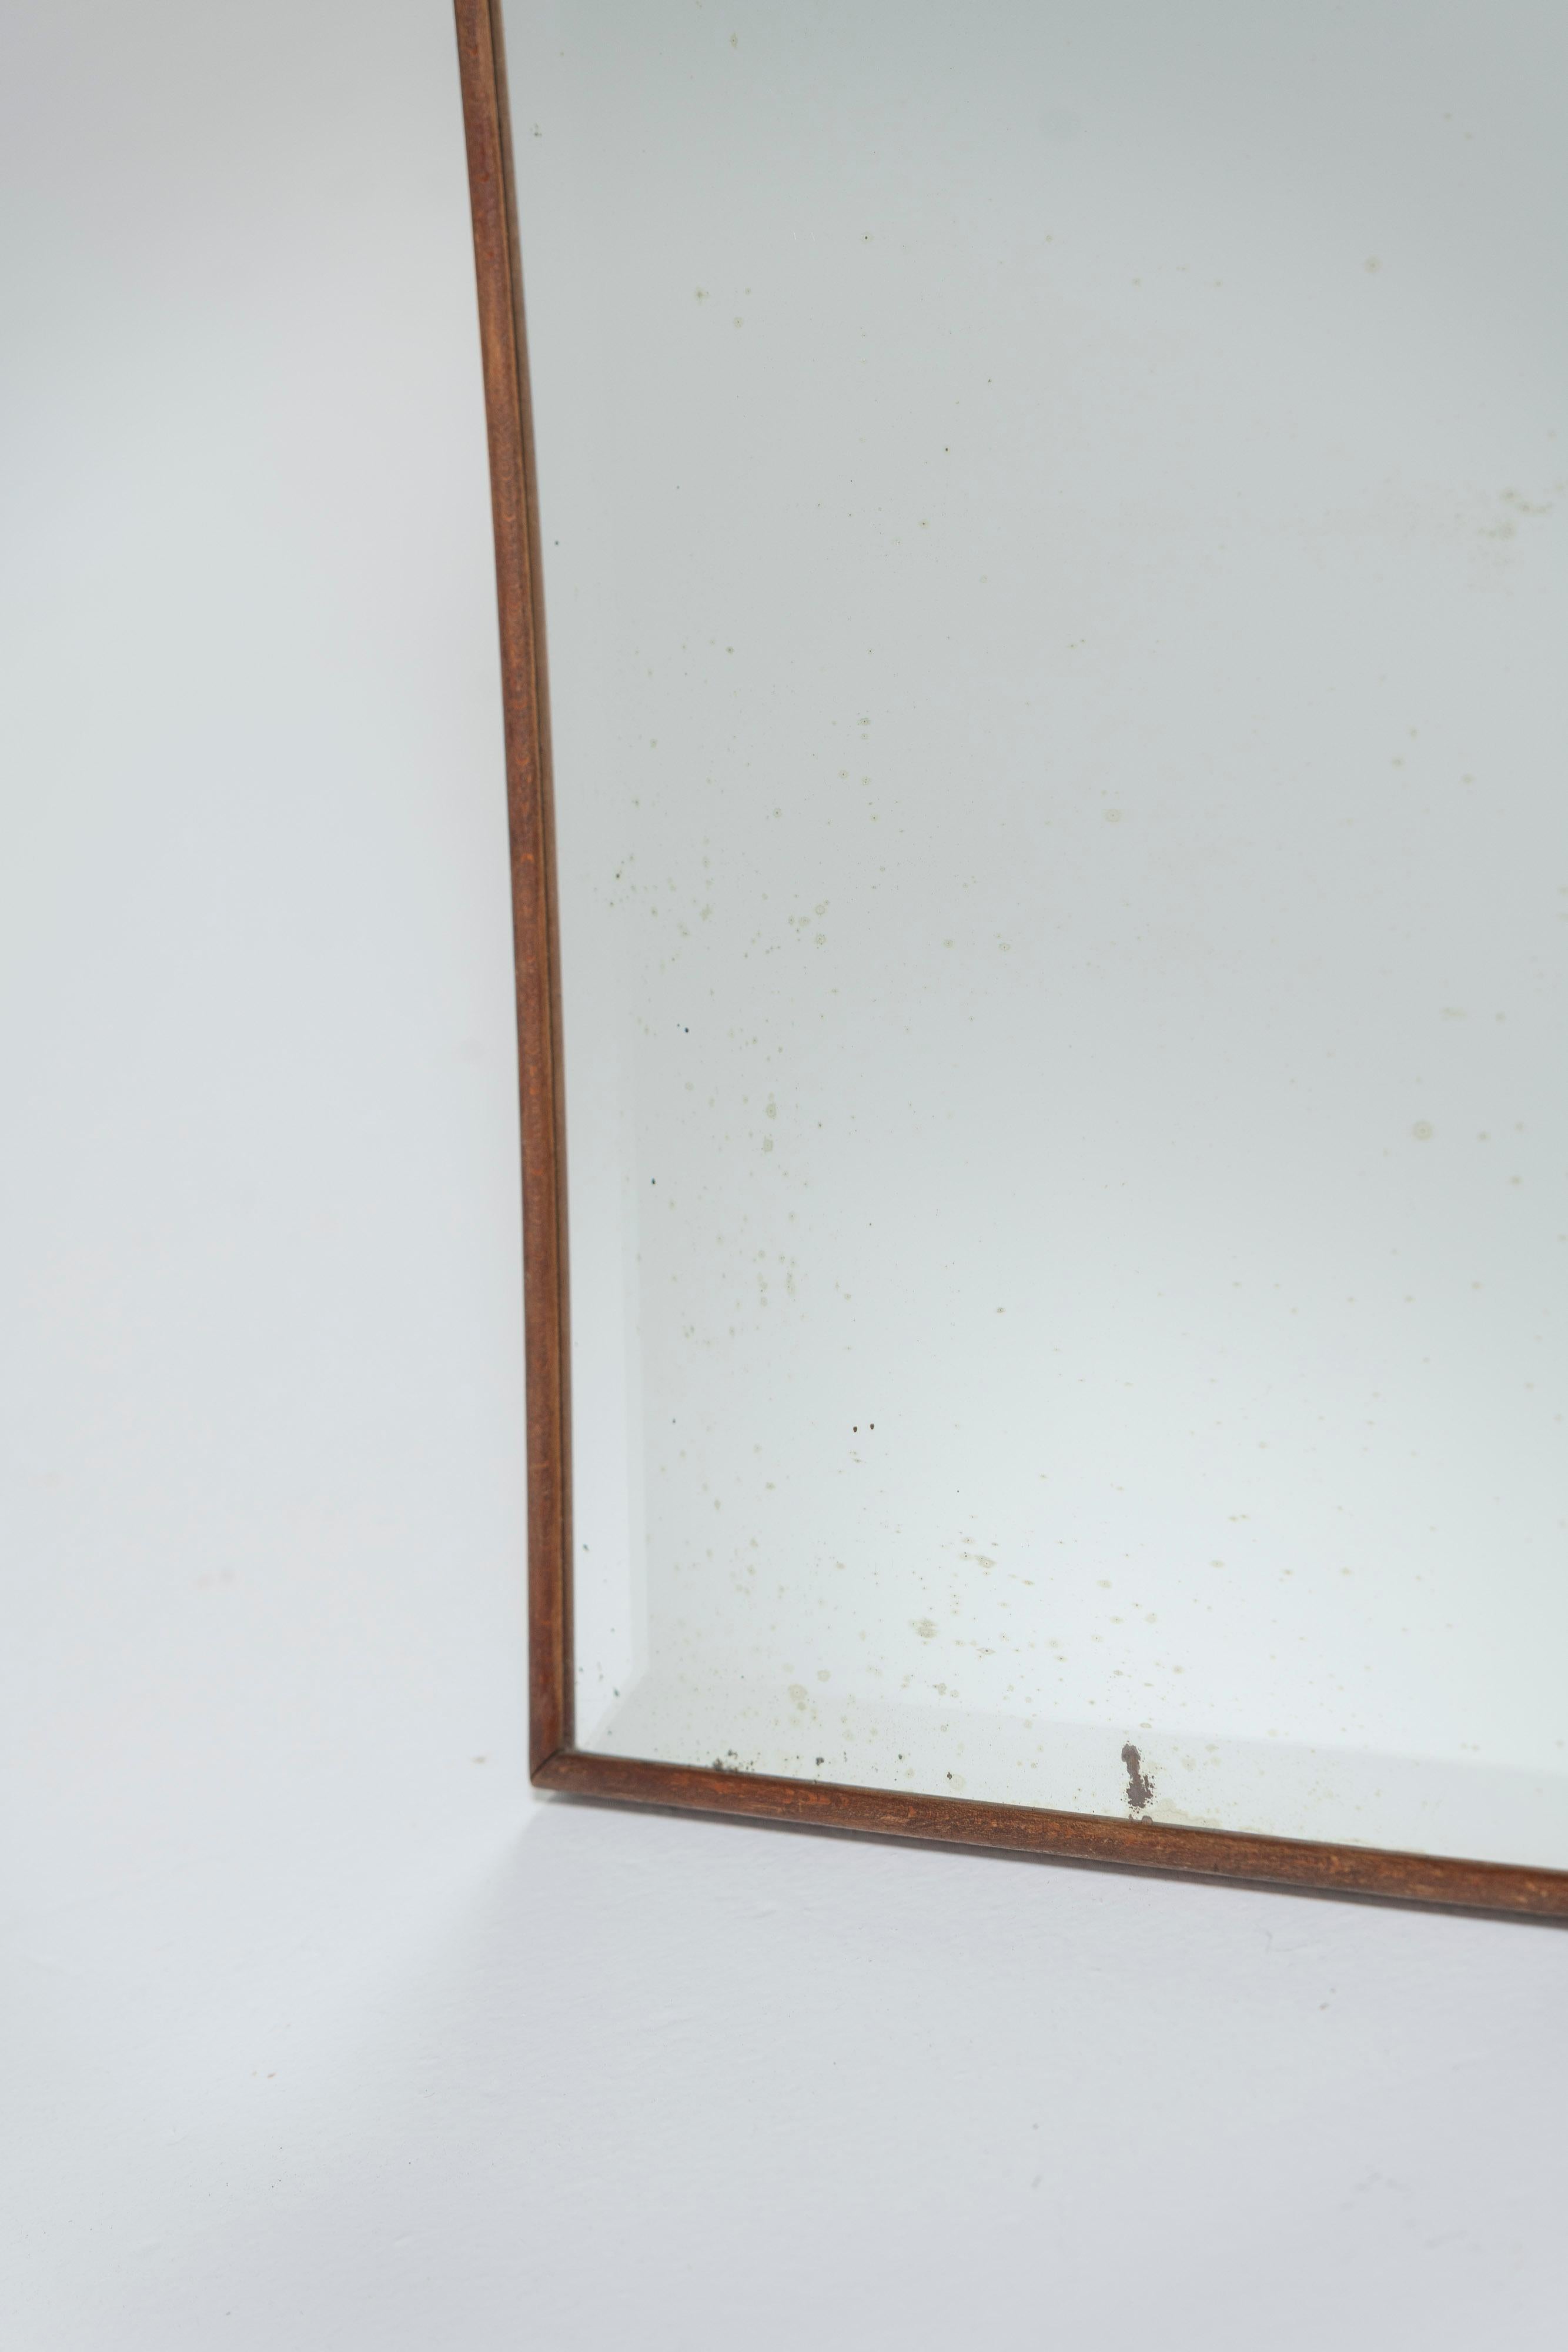 Vintage Mid-Century Modern mirror is made of beveled ground glass and beautifully framed in wood. The top and sides are gently curved, offering more than a typical rectangular shape to its perfect spot. Some minor fading in the mirror, consistent